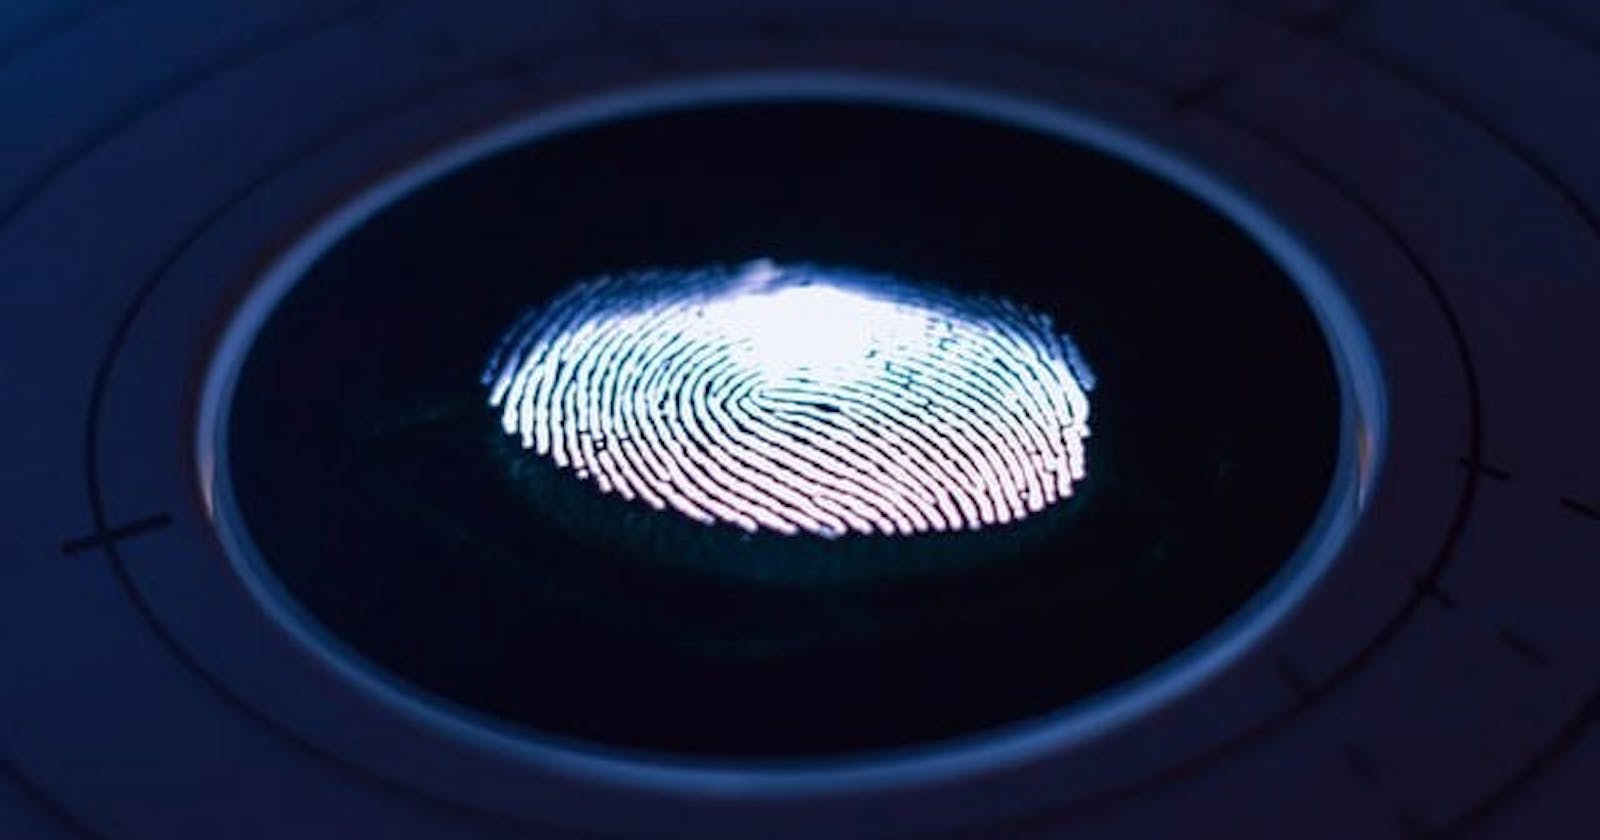 How to Integrate Biometrics in React Native — Overview of 3 Approaches